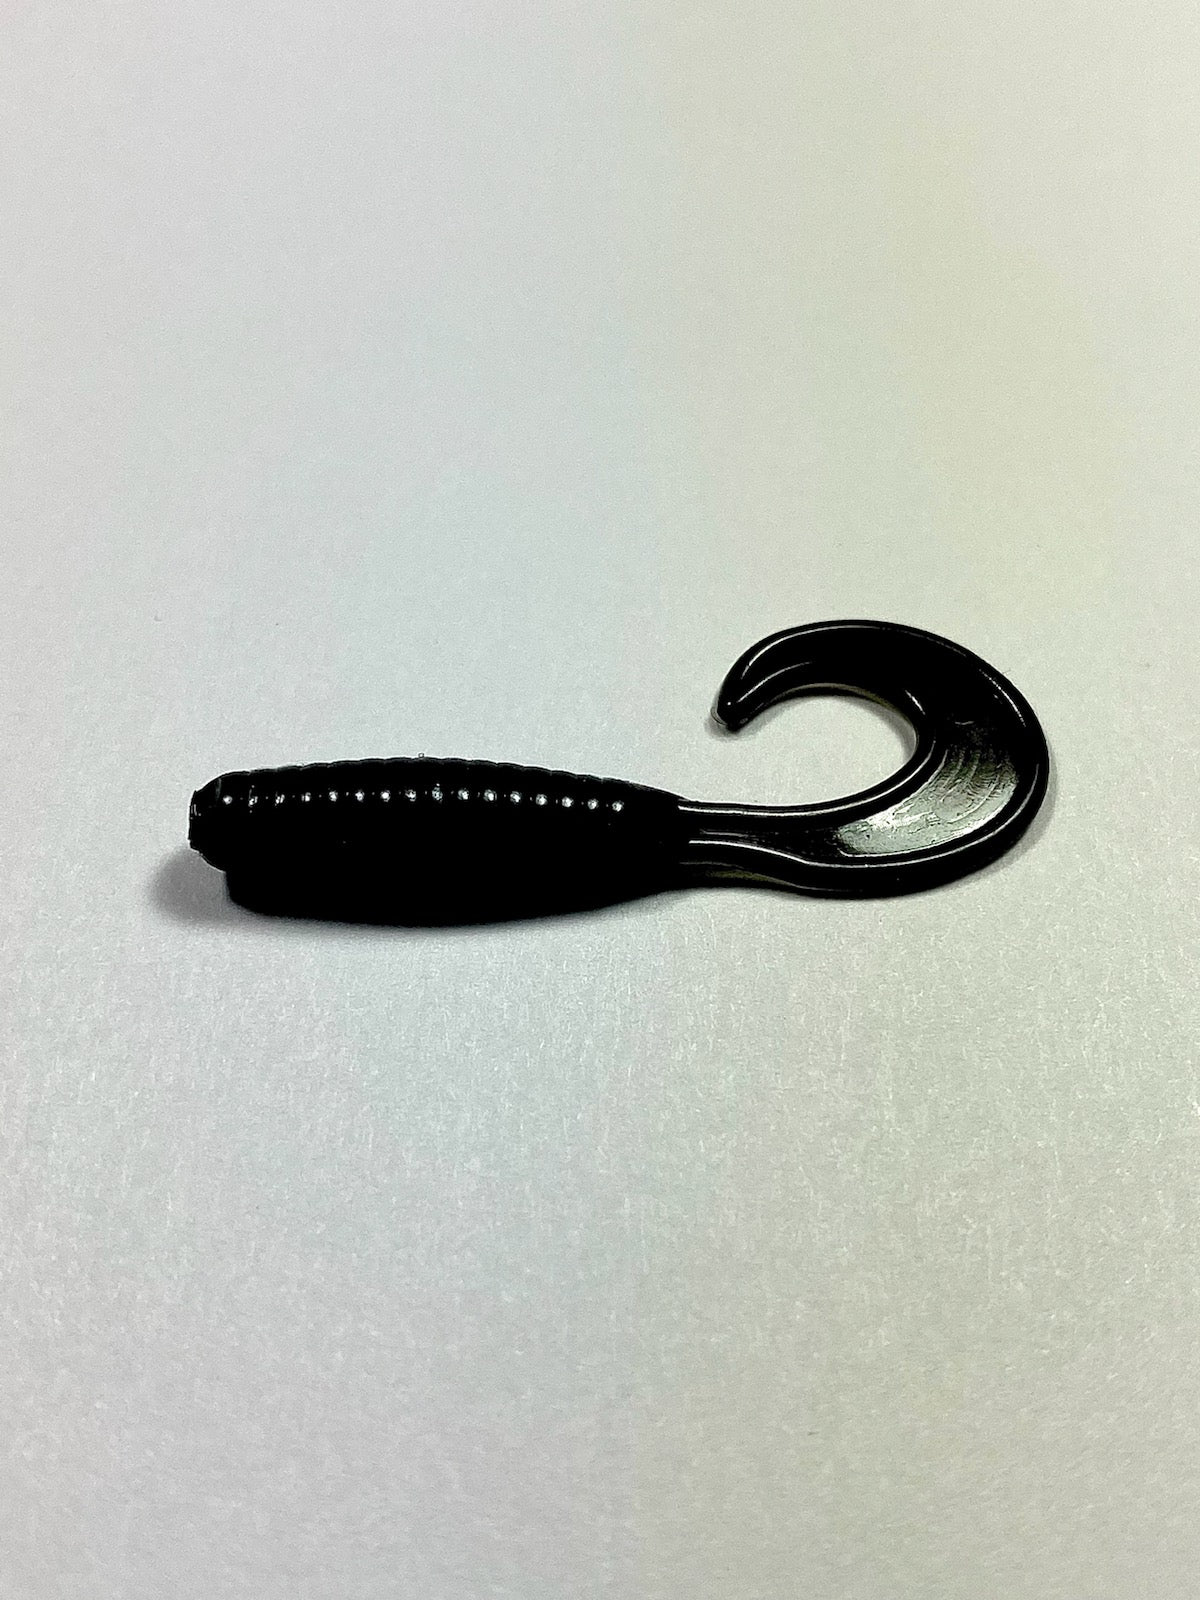 2 Inch Curly Tail Grub – Tackle Command